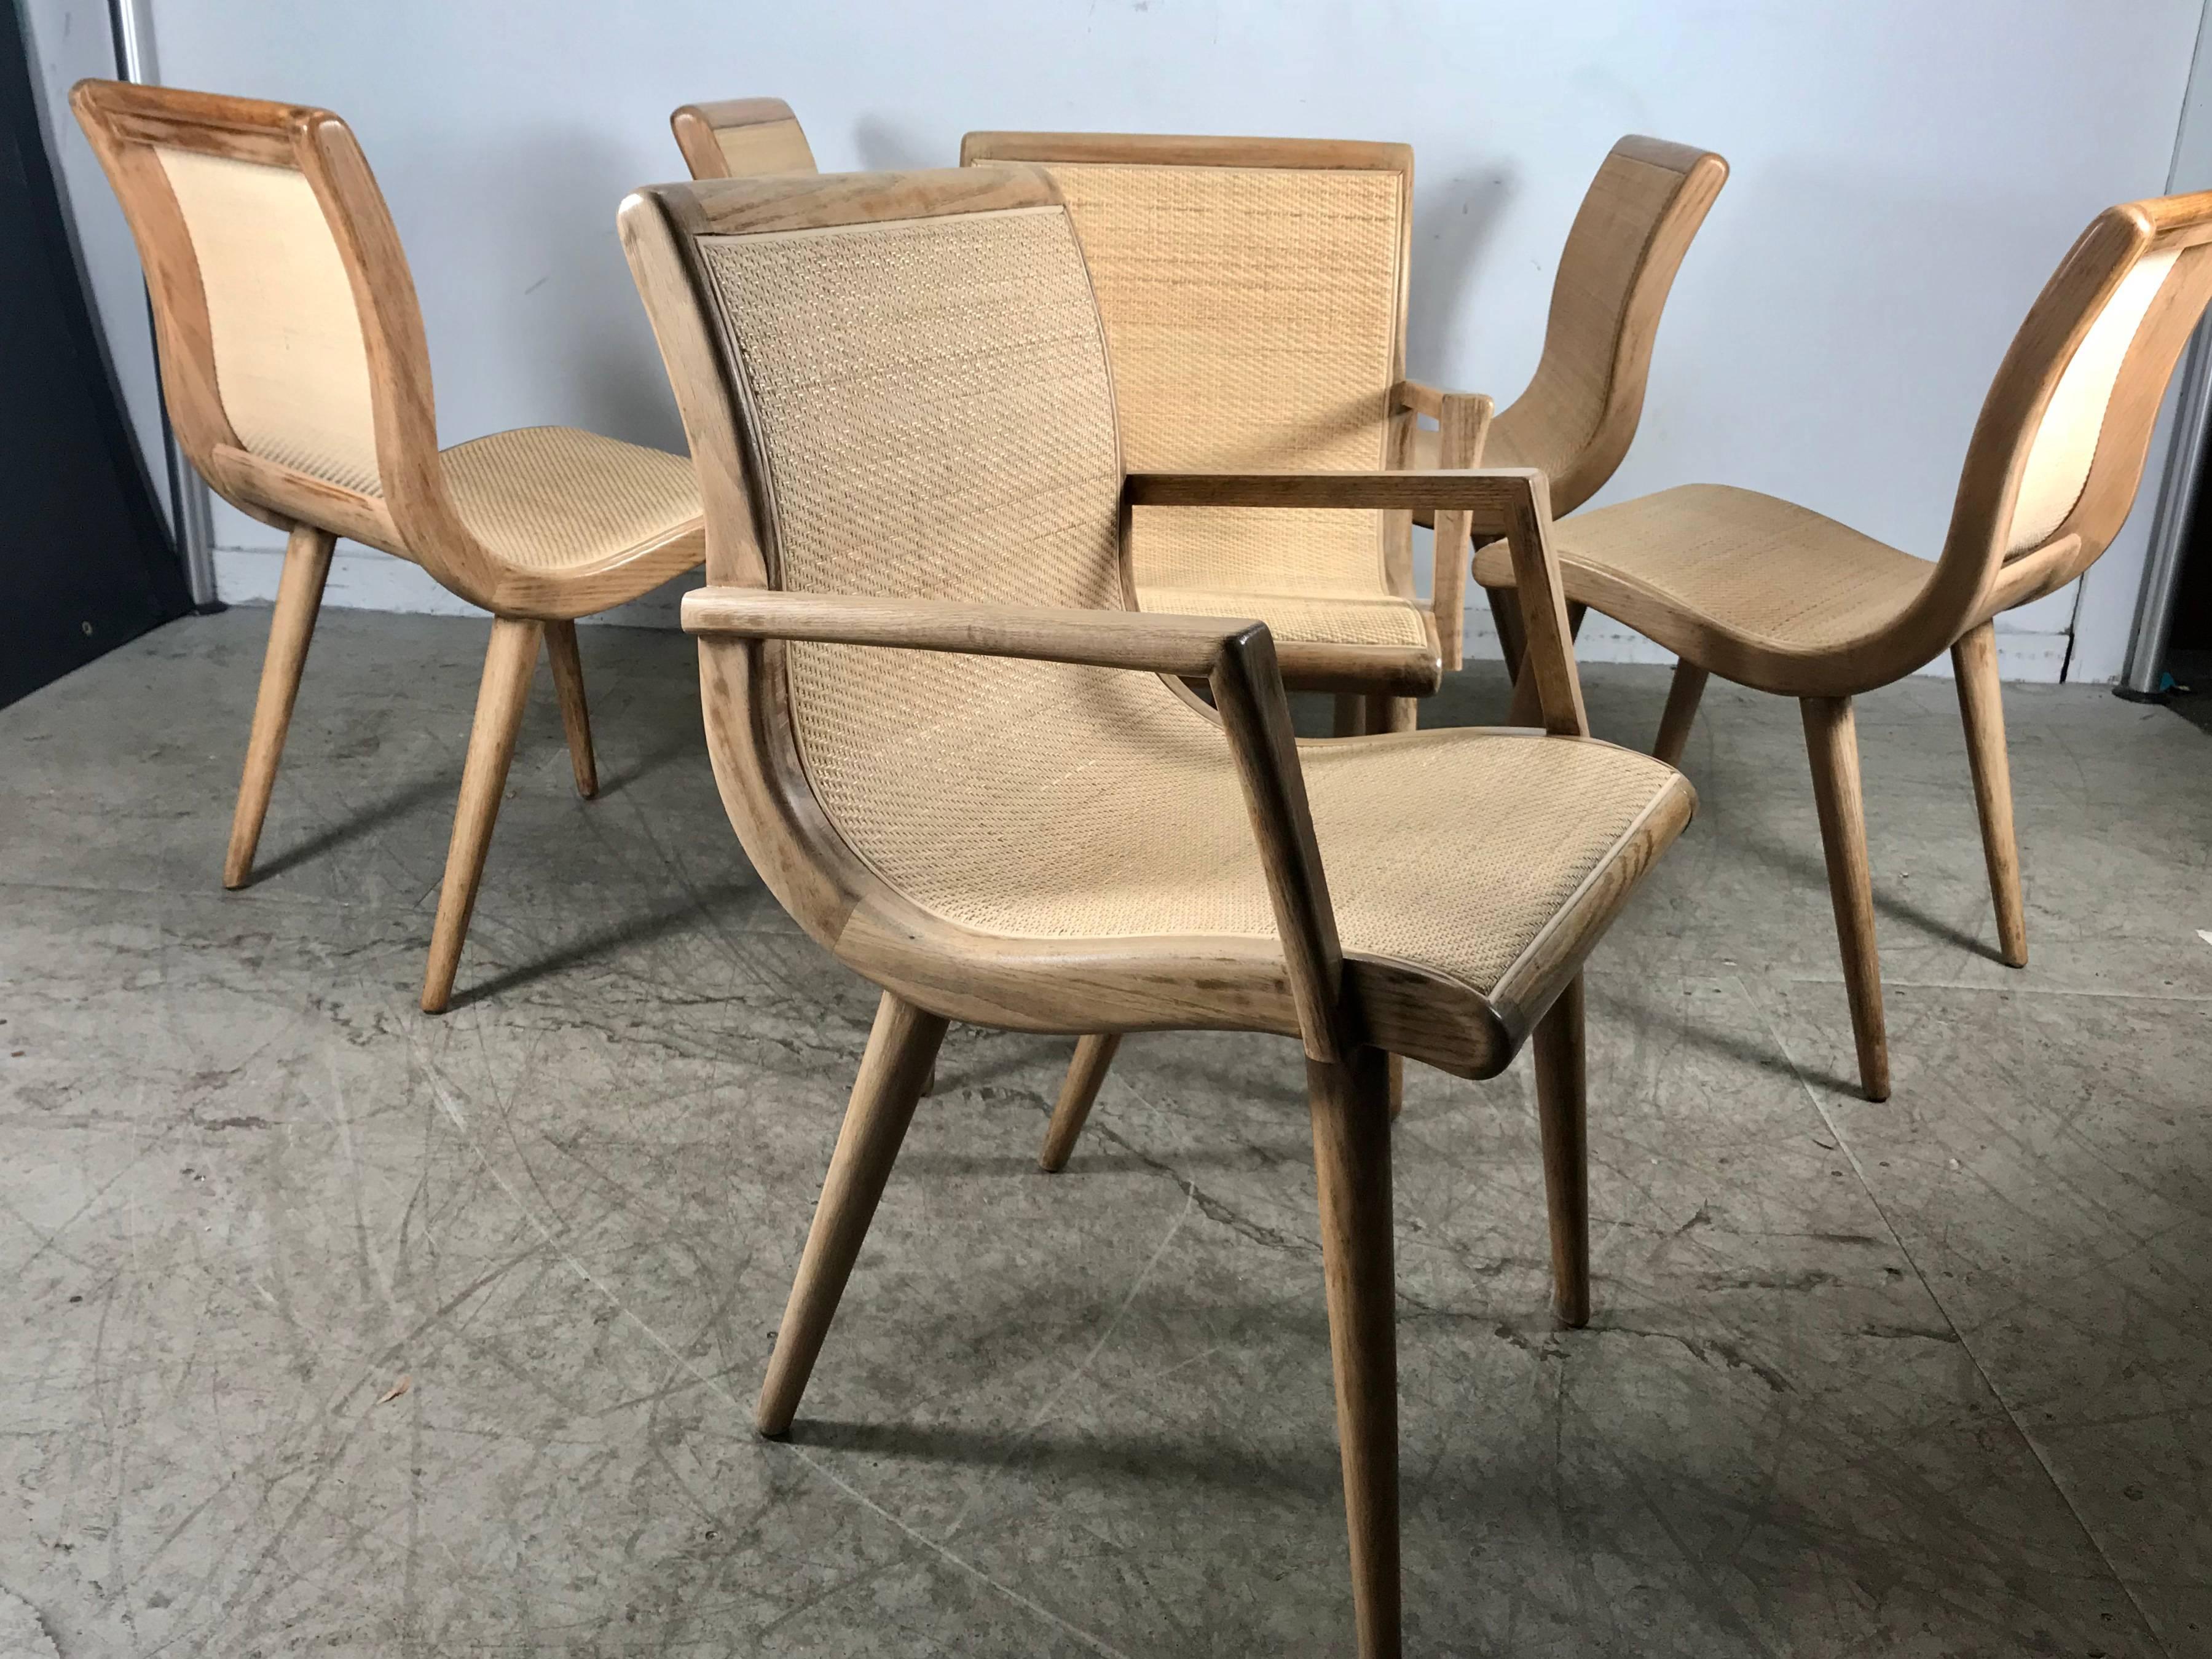 Classic set of six Mid-Century Modern dining chairs designed by Russel Wright for Conant & Ball. Fabric has been removed to expose the graceful wood curved seats, new caning added making this set as fresh today as the day they were designed over 60